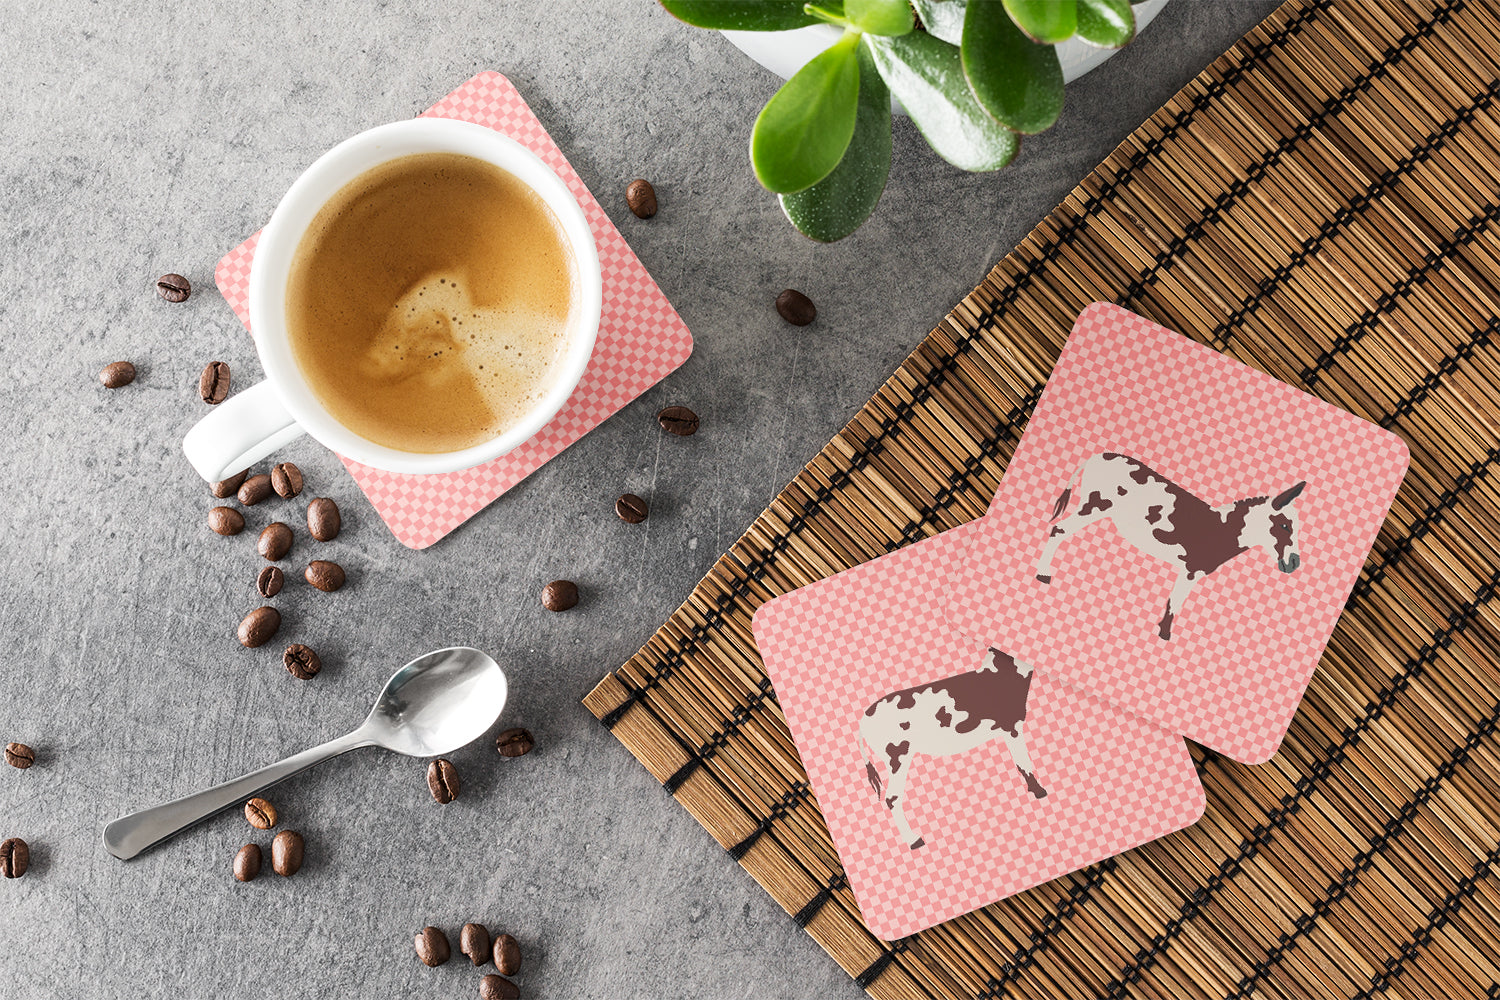 American Spotted Donkey Pink Check Foam Coaster Set of 4 BB7851FC - the-store.com